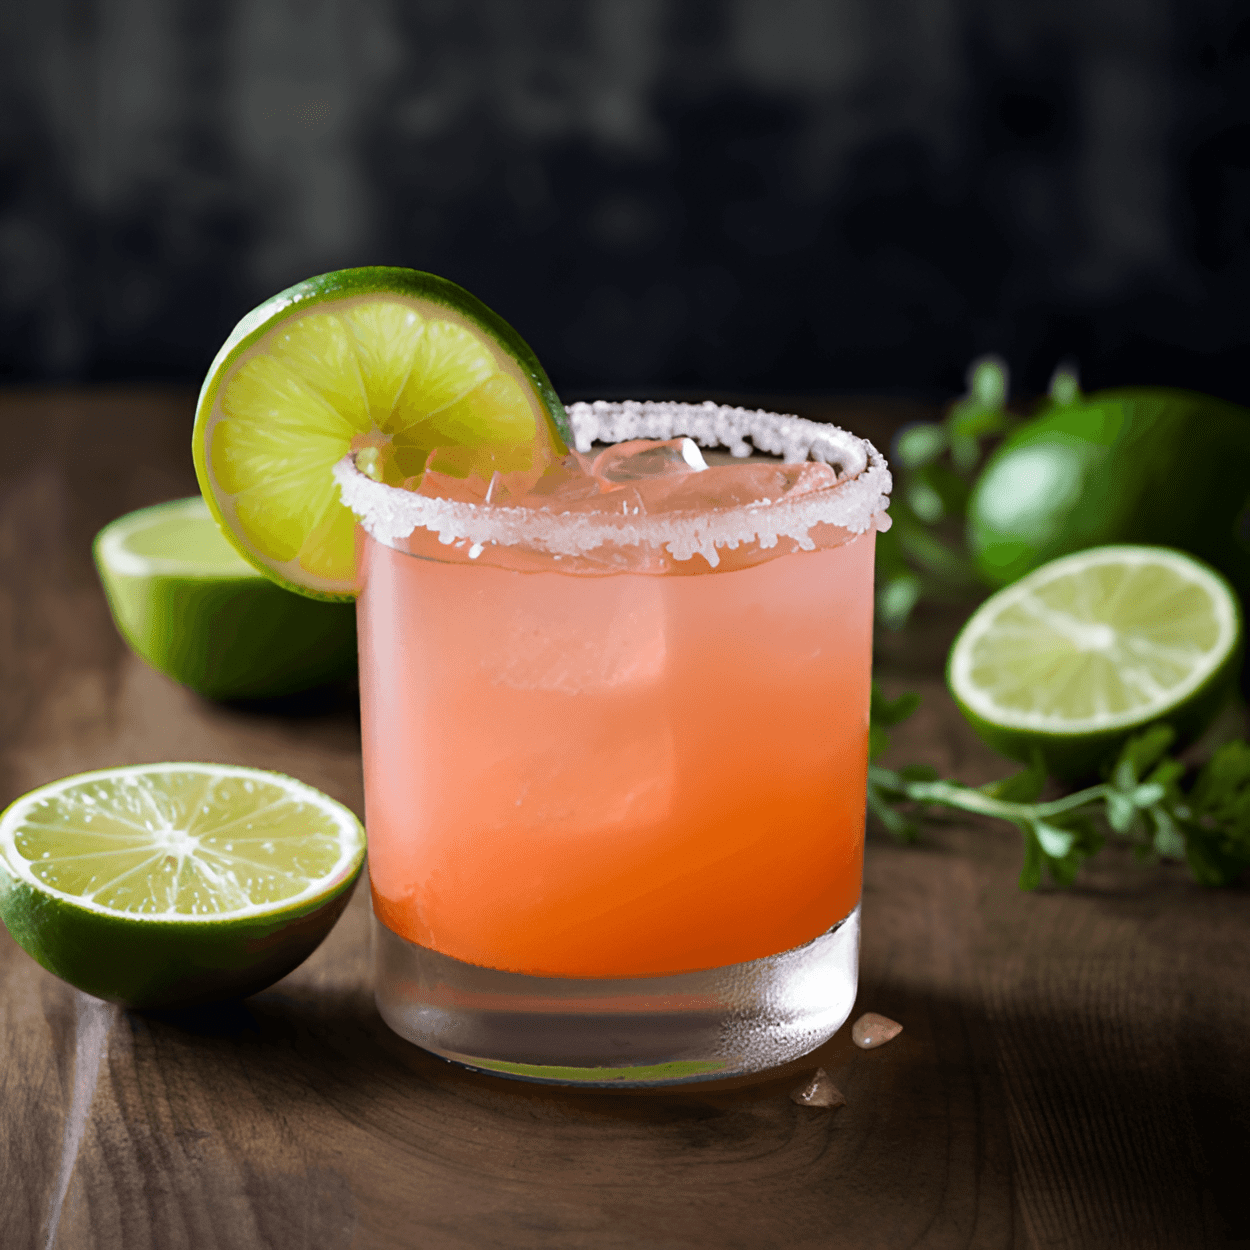 Rusa Drink Recipe - The Rusa cocktail is a delightful blend of tangy, sweet, and sour flavors. The citrusy notes from the lime and grapefruit are balanced by the sweetness of the soda, while the salt rim adds a savory touch. It's a refreshing, light, and thirst-quenching drink.